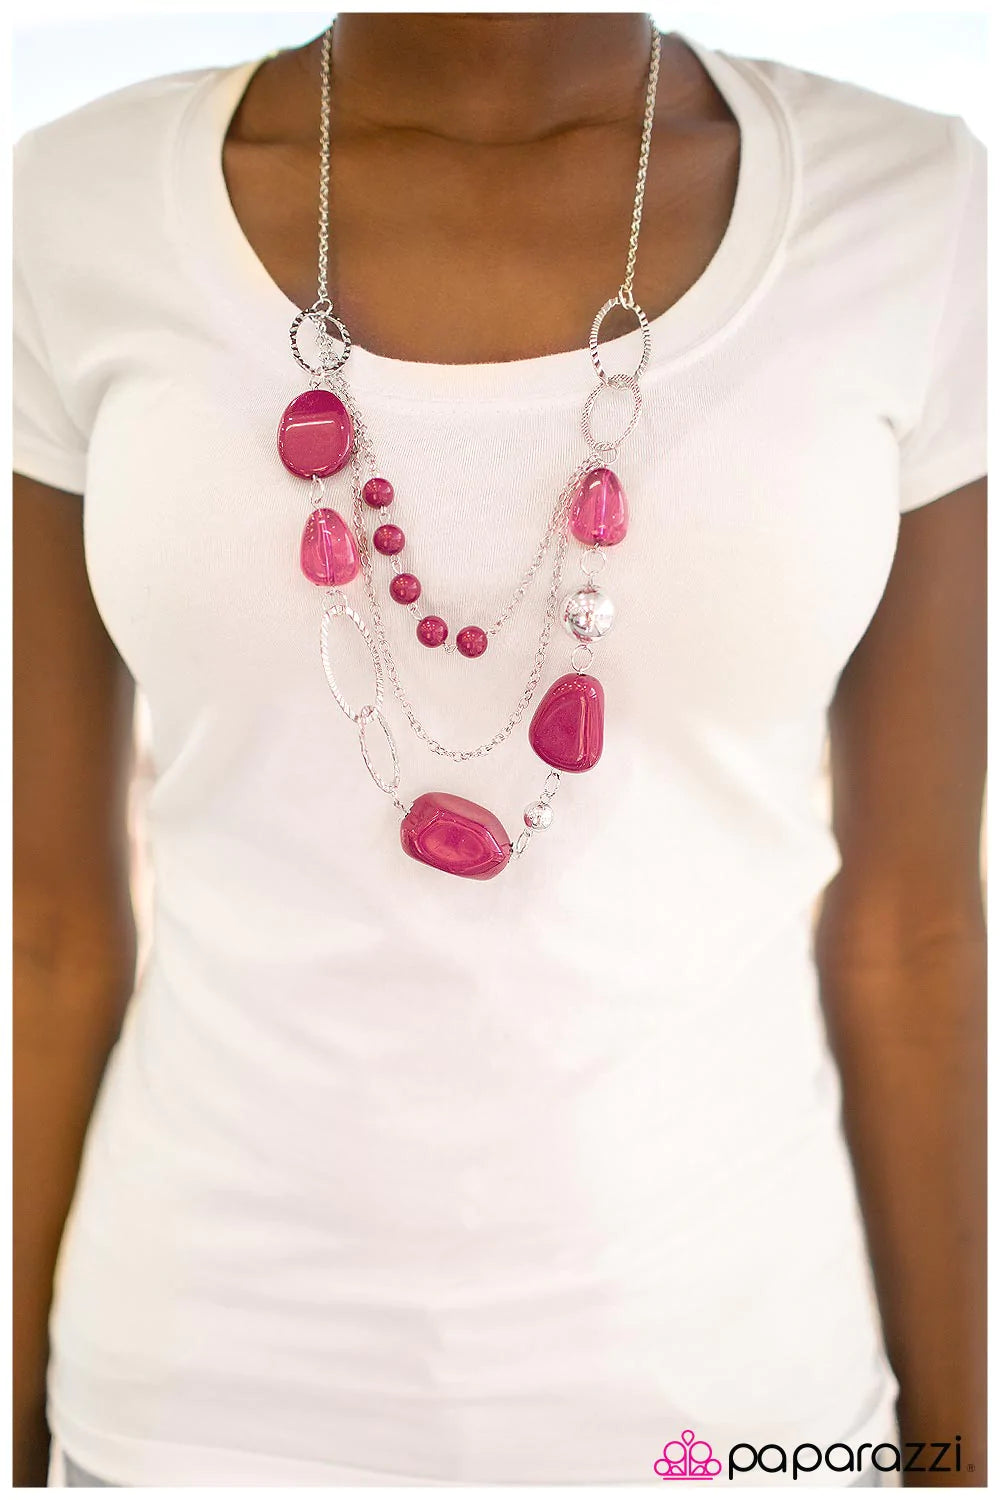 Paparazzi Necklace ~ Easy On The Eyes - Pink